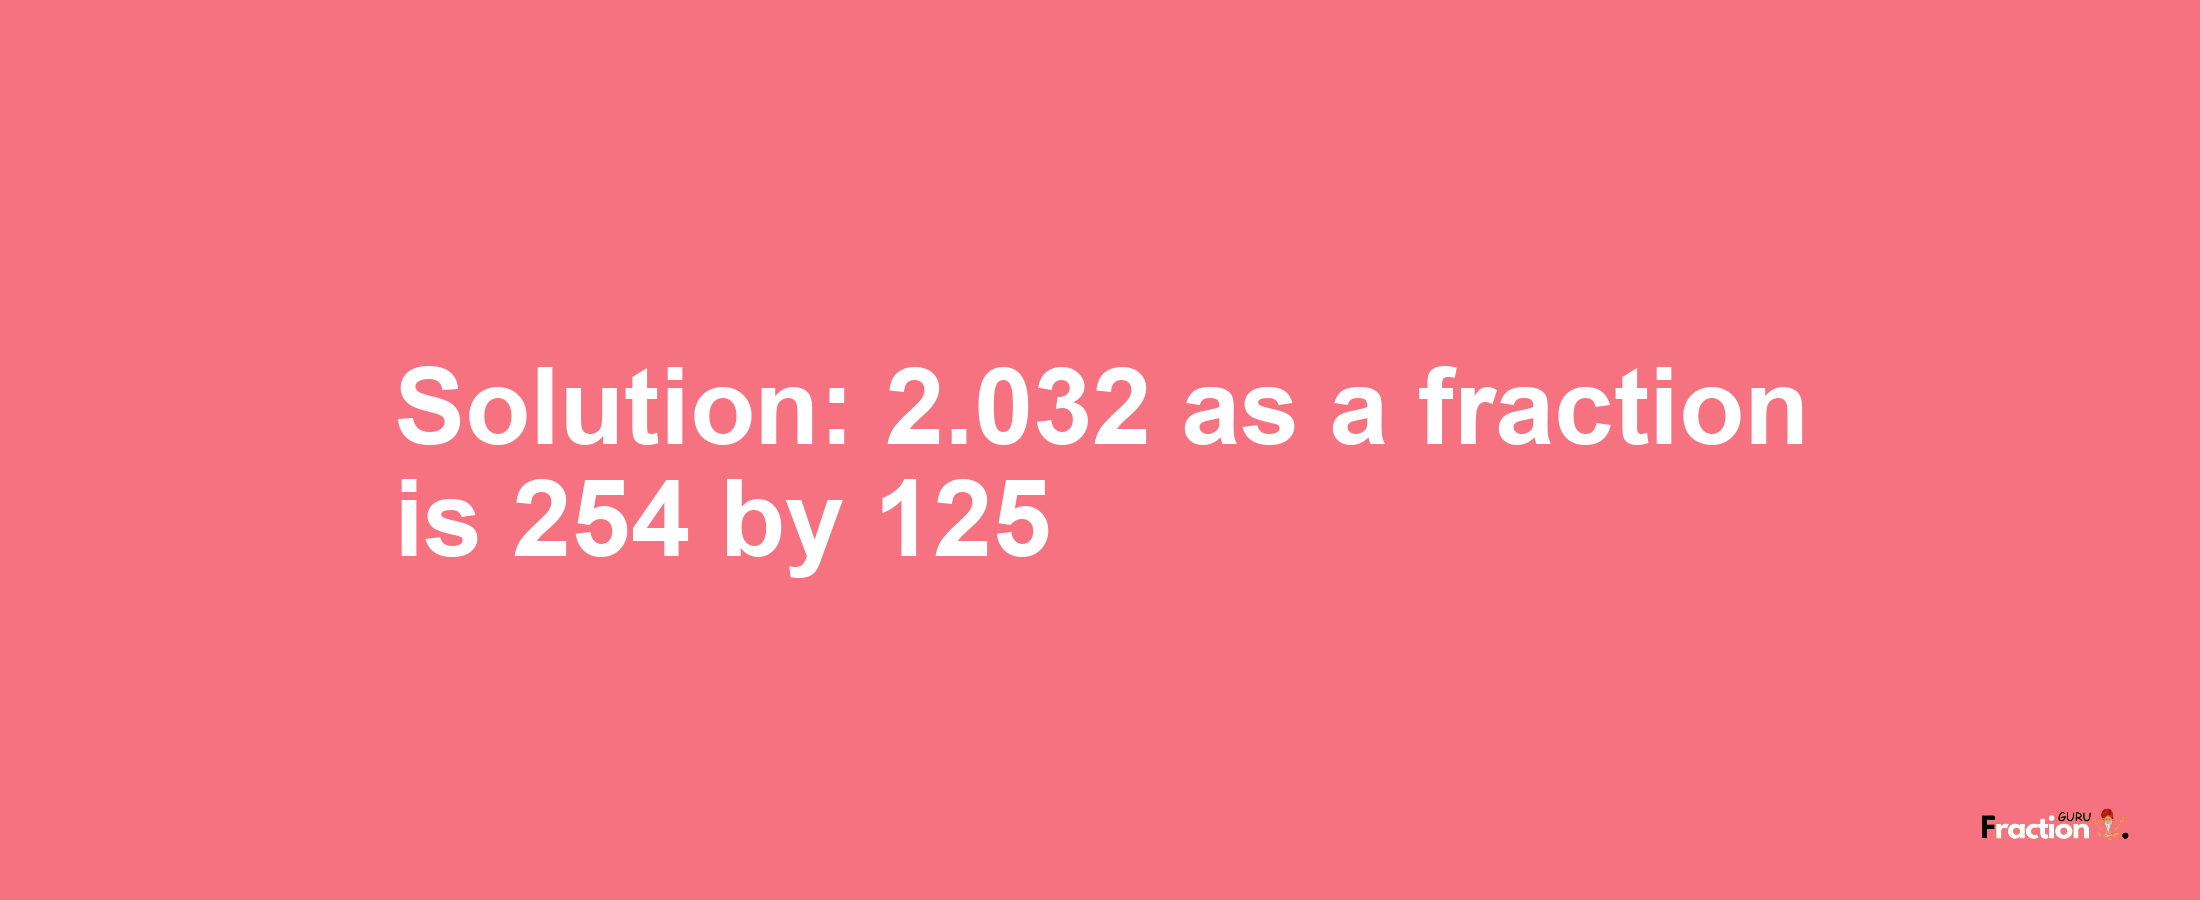 Solution:2.032 as a fraction is 254/125